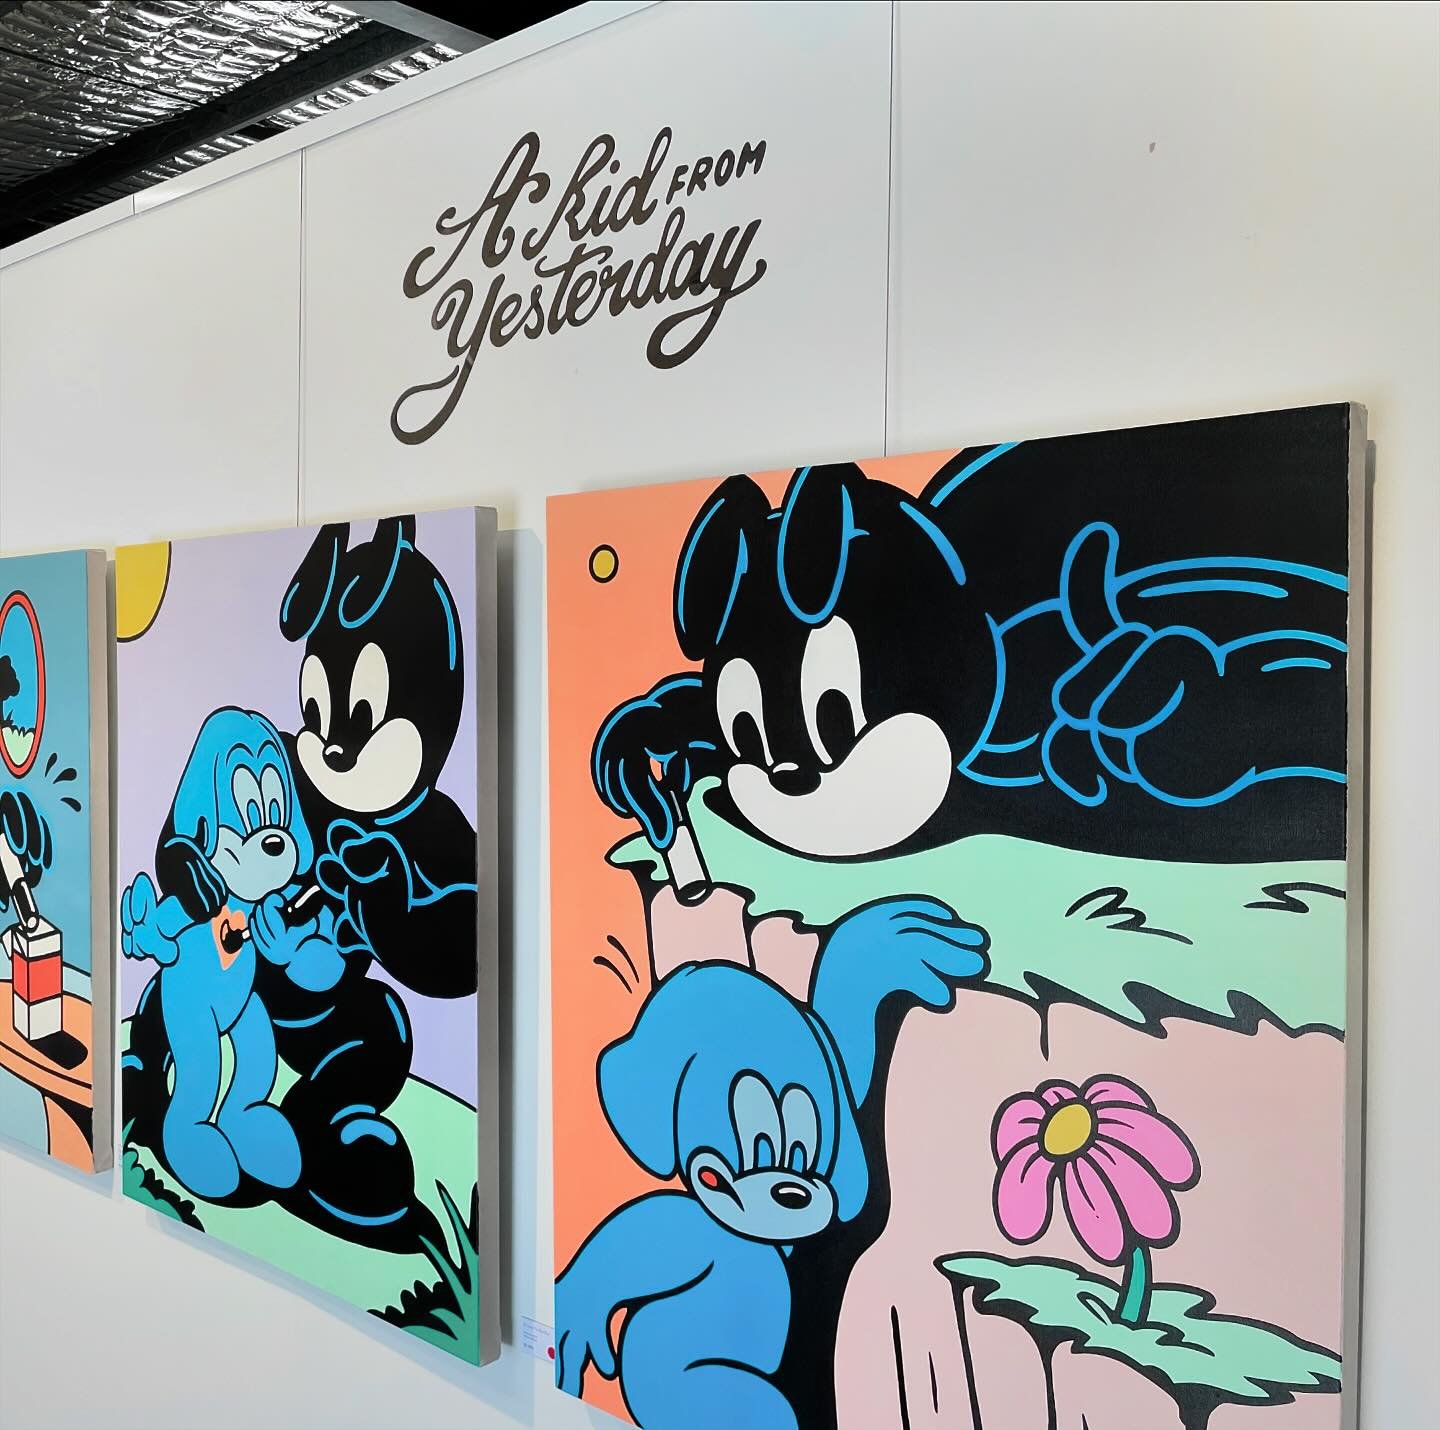 Big thanks to everyone who came to the opening of the fully sold out solo exhibition by @a.kidfromyesterday presented by @superwow.gallery and @stupidkrap 

That was a fun night! Amazing body of work too 👏🥳